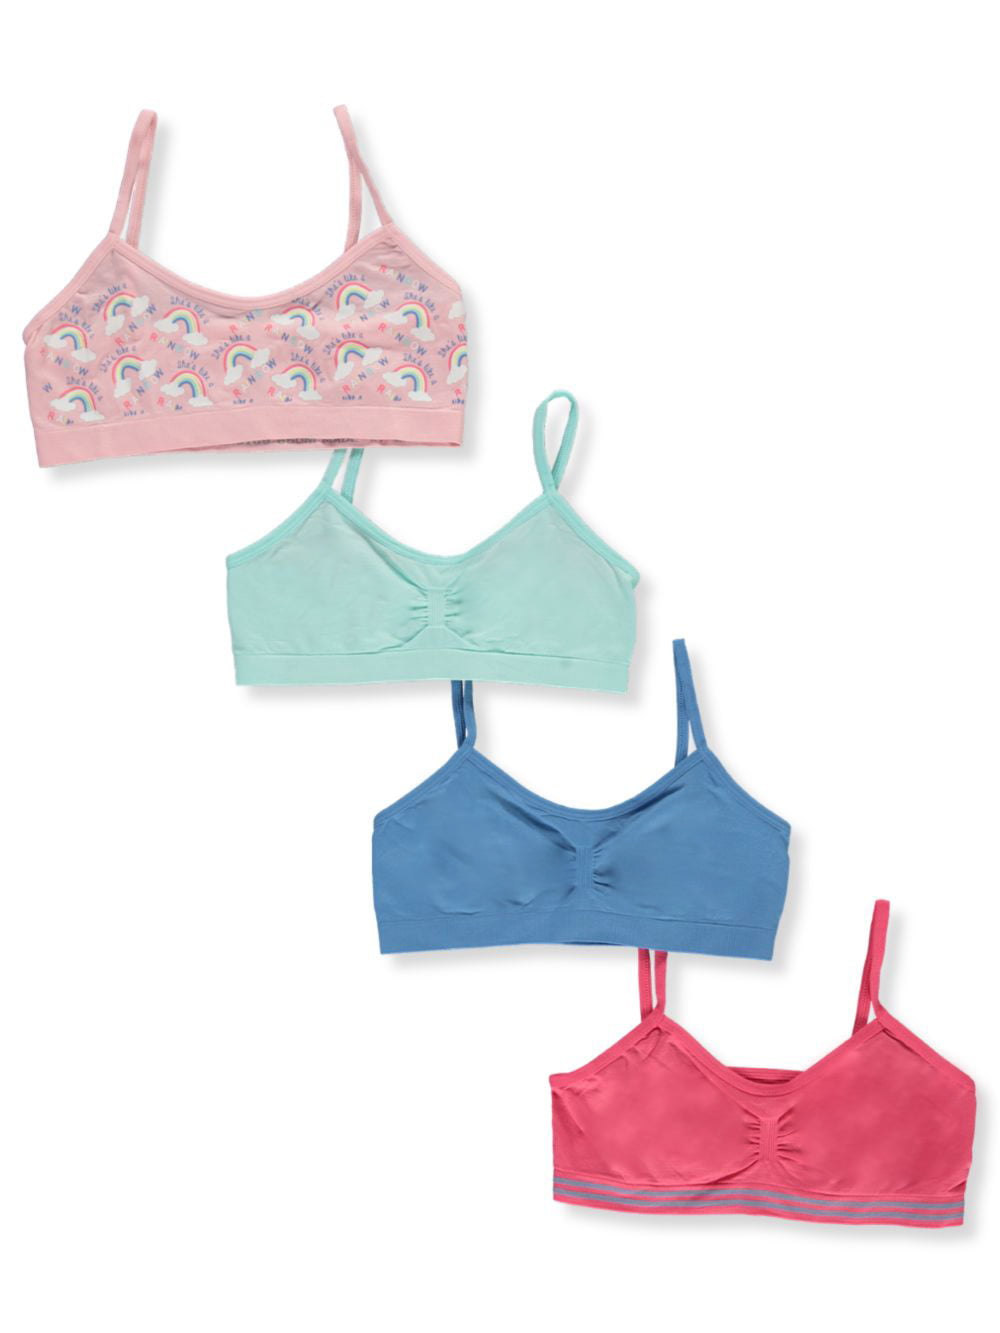 Simply Adorable Girls Seamless Training Bras Pack of 4 